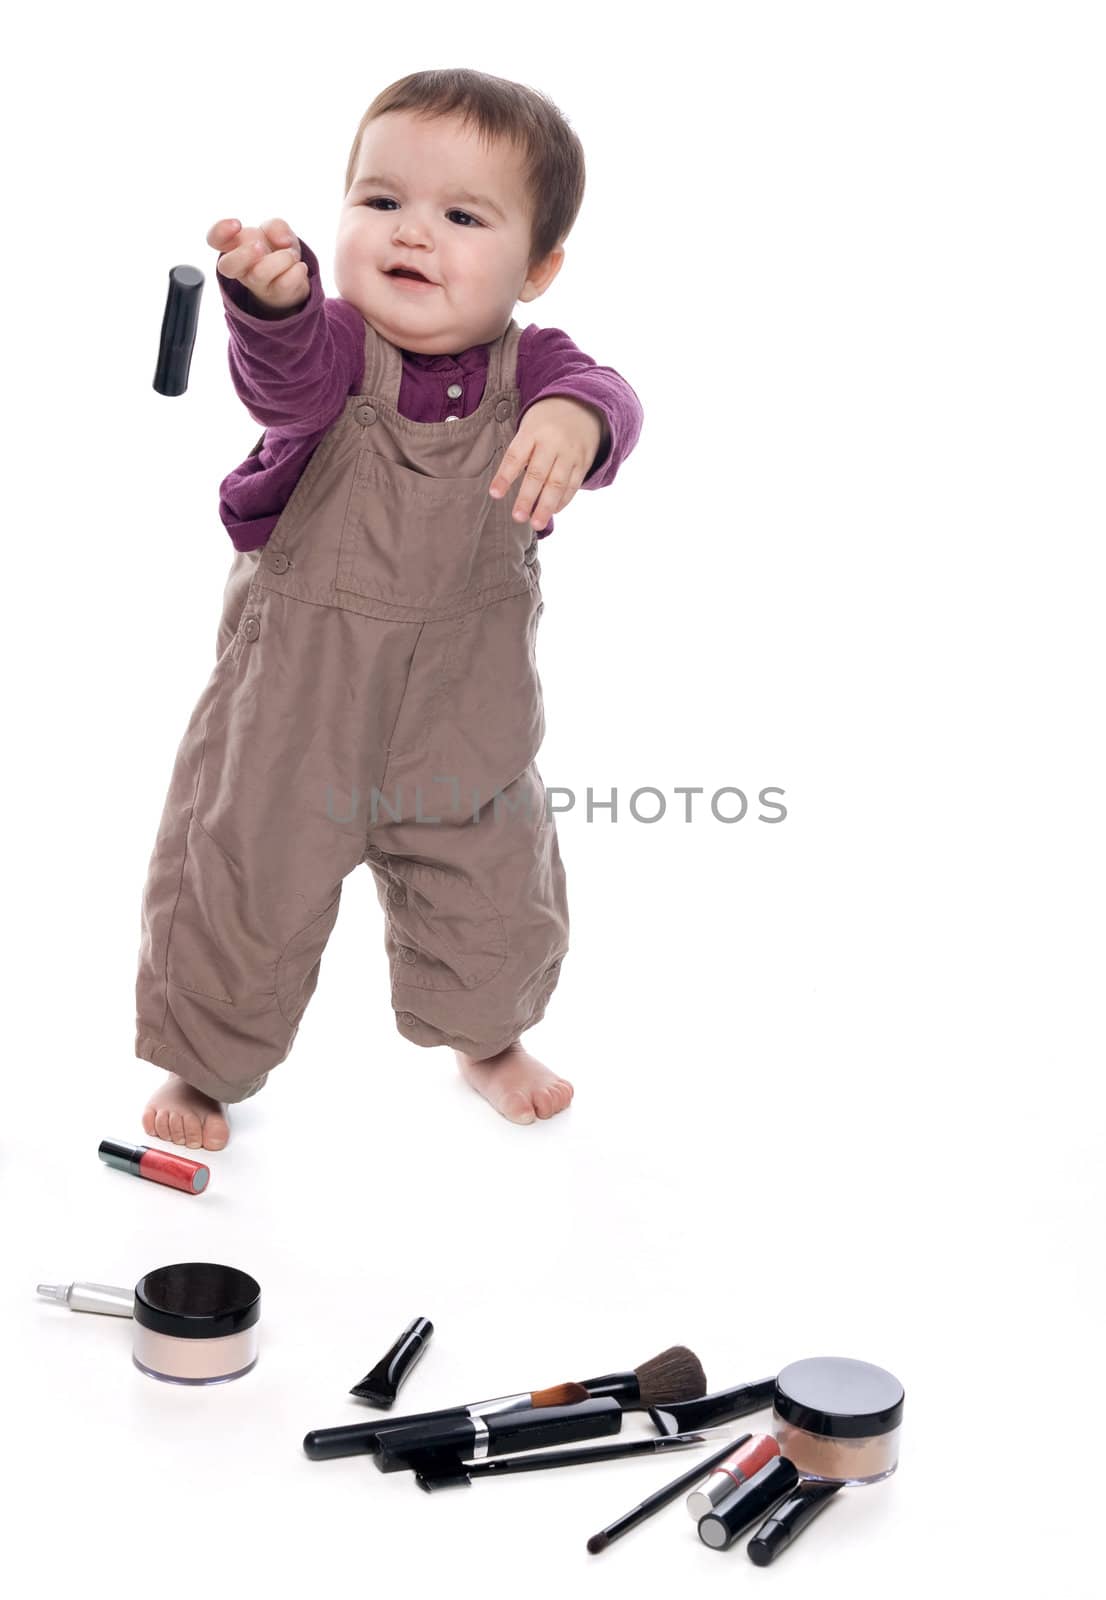 Baby girl playing with cosmetics, white background